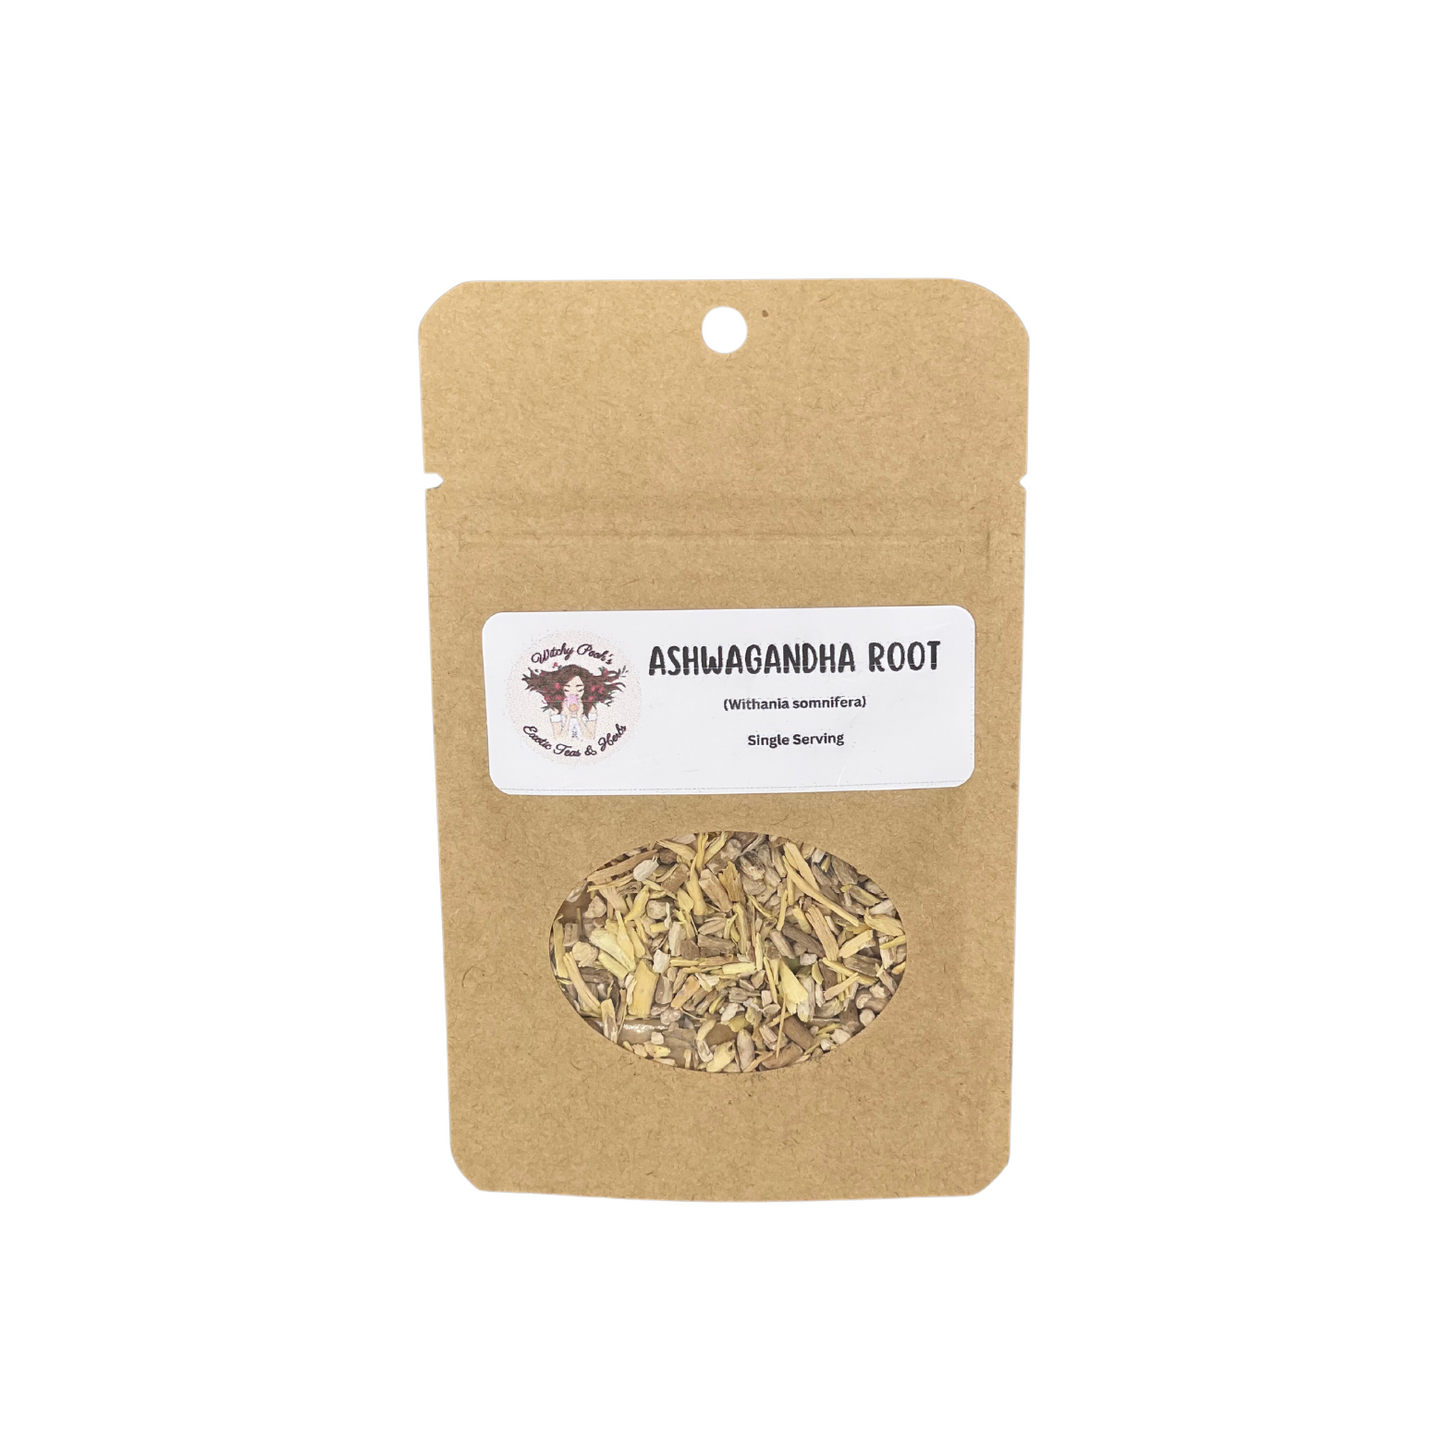 Ashwagandha Root, Pieces of Root, Dried Herbs, Food Grade Herbs, Herbs and Spices, Loose Leaf Herbs